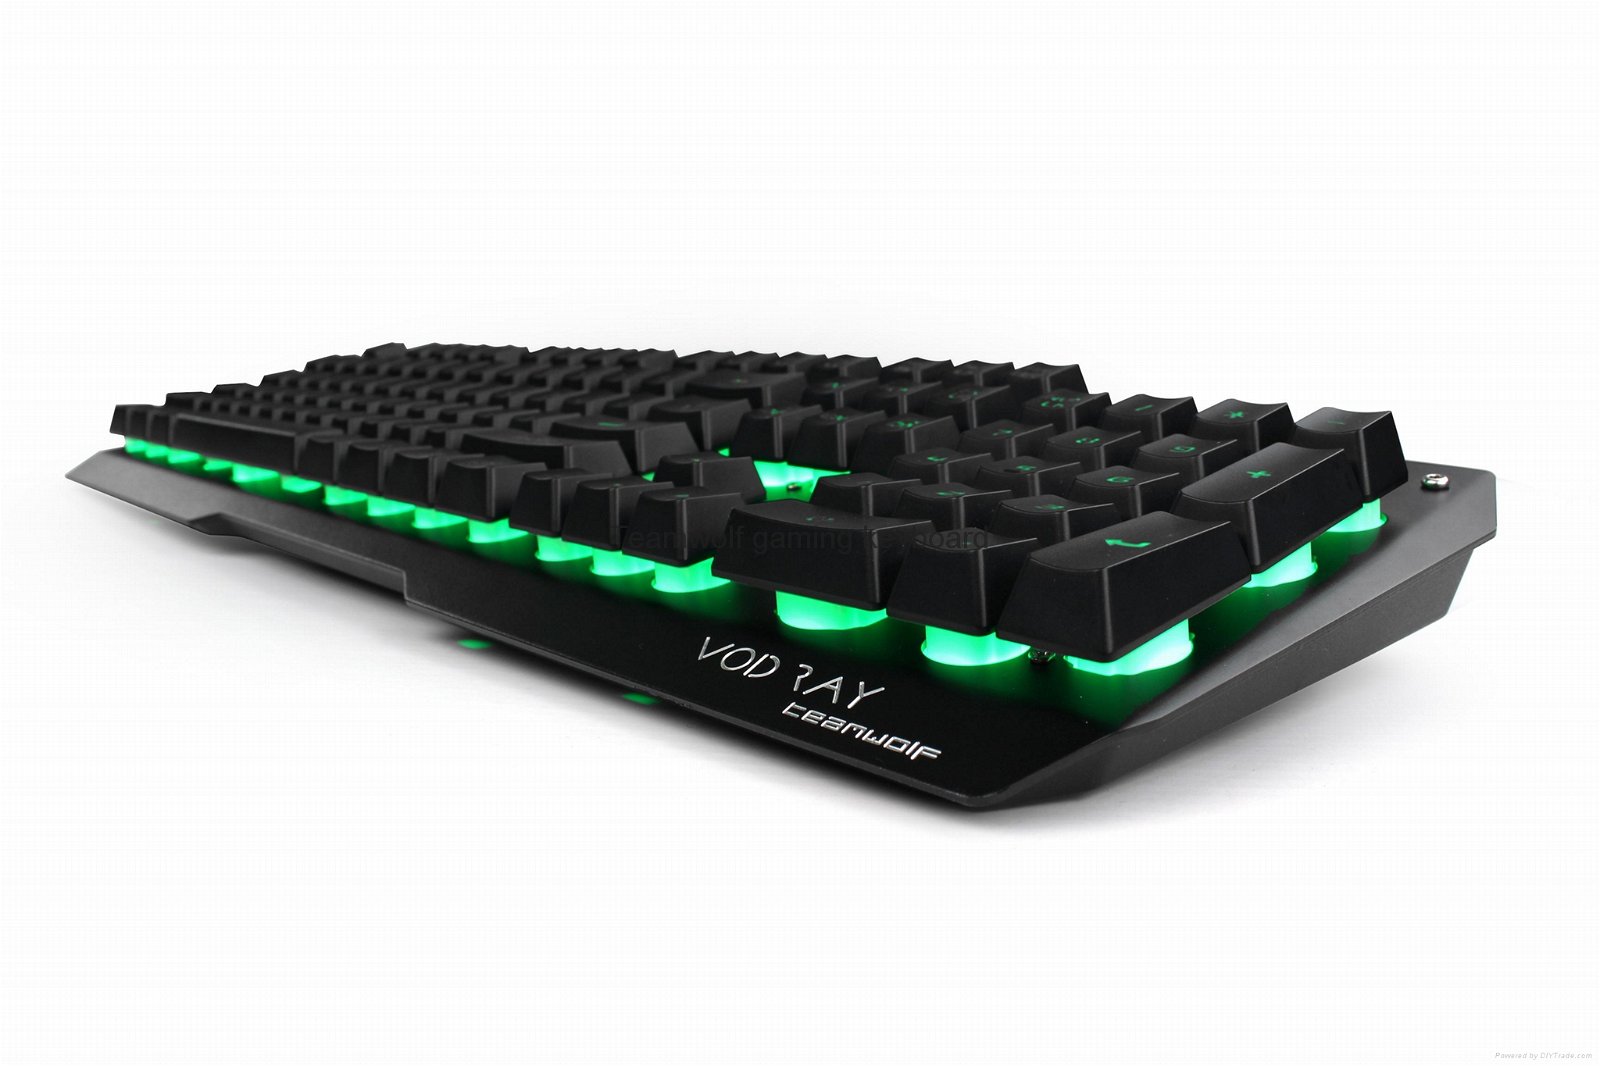 Arbiter-TEAMWOLF wired Membrain gaming keyboard with color Mixed light-G13 5